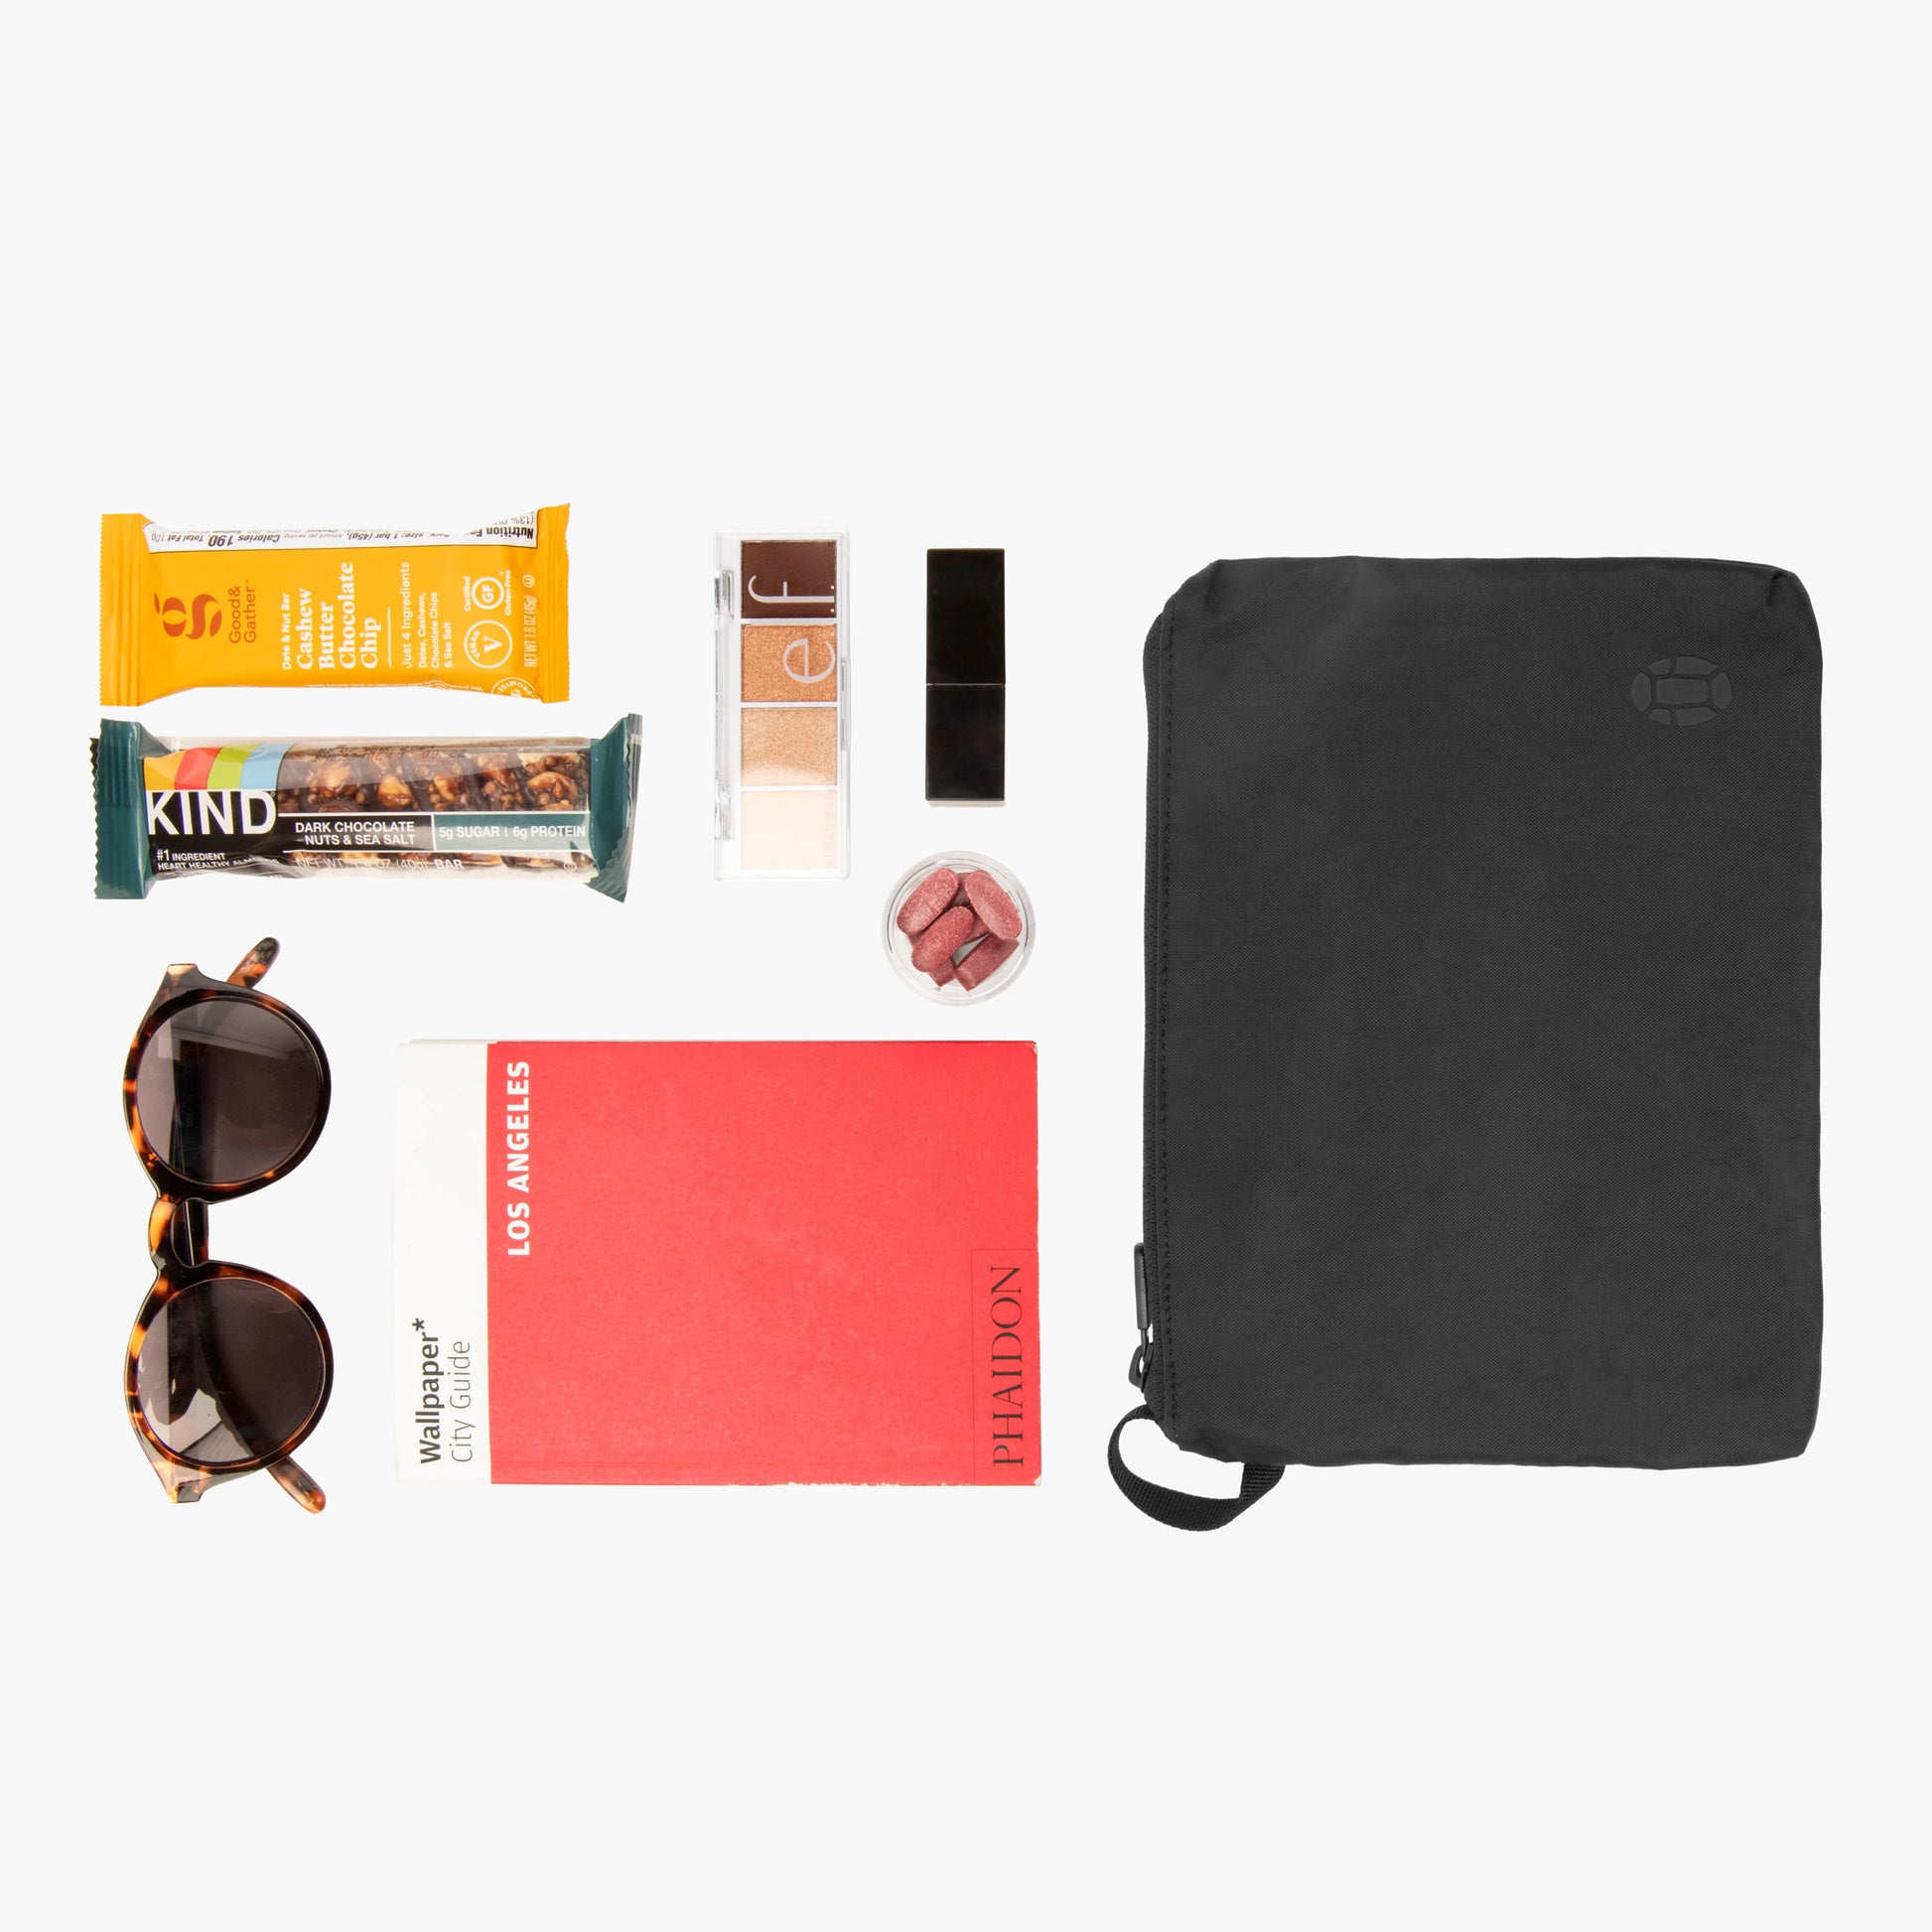 Daily essentials in the medium pouch